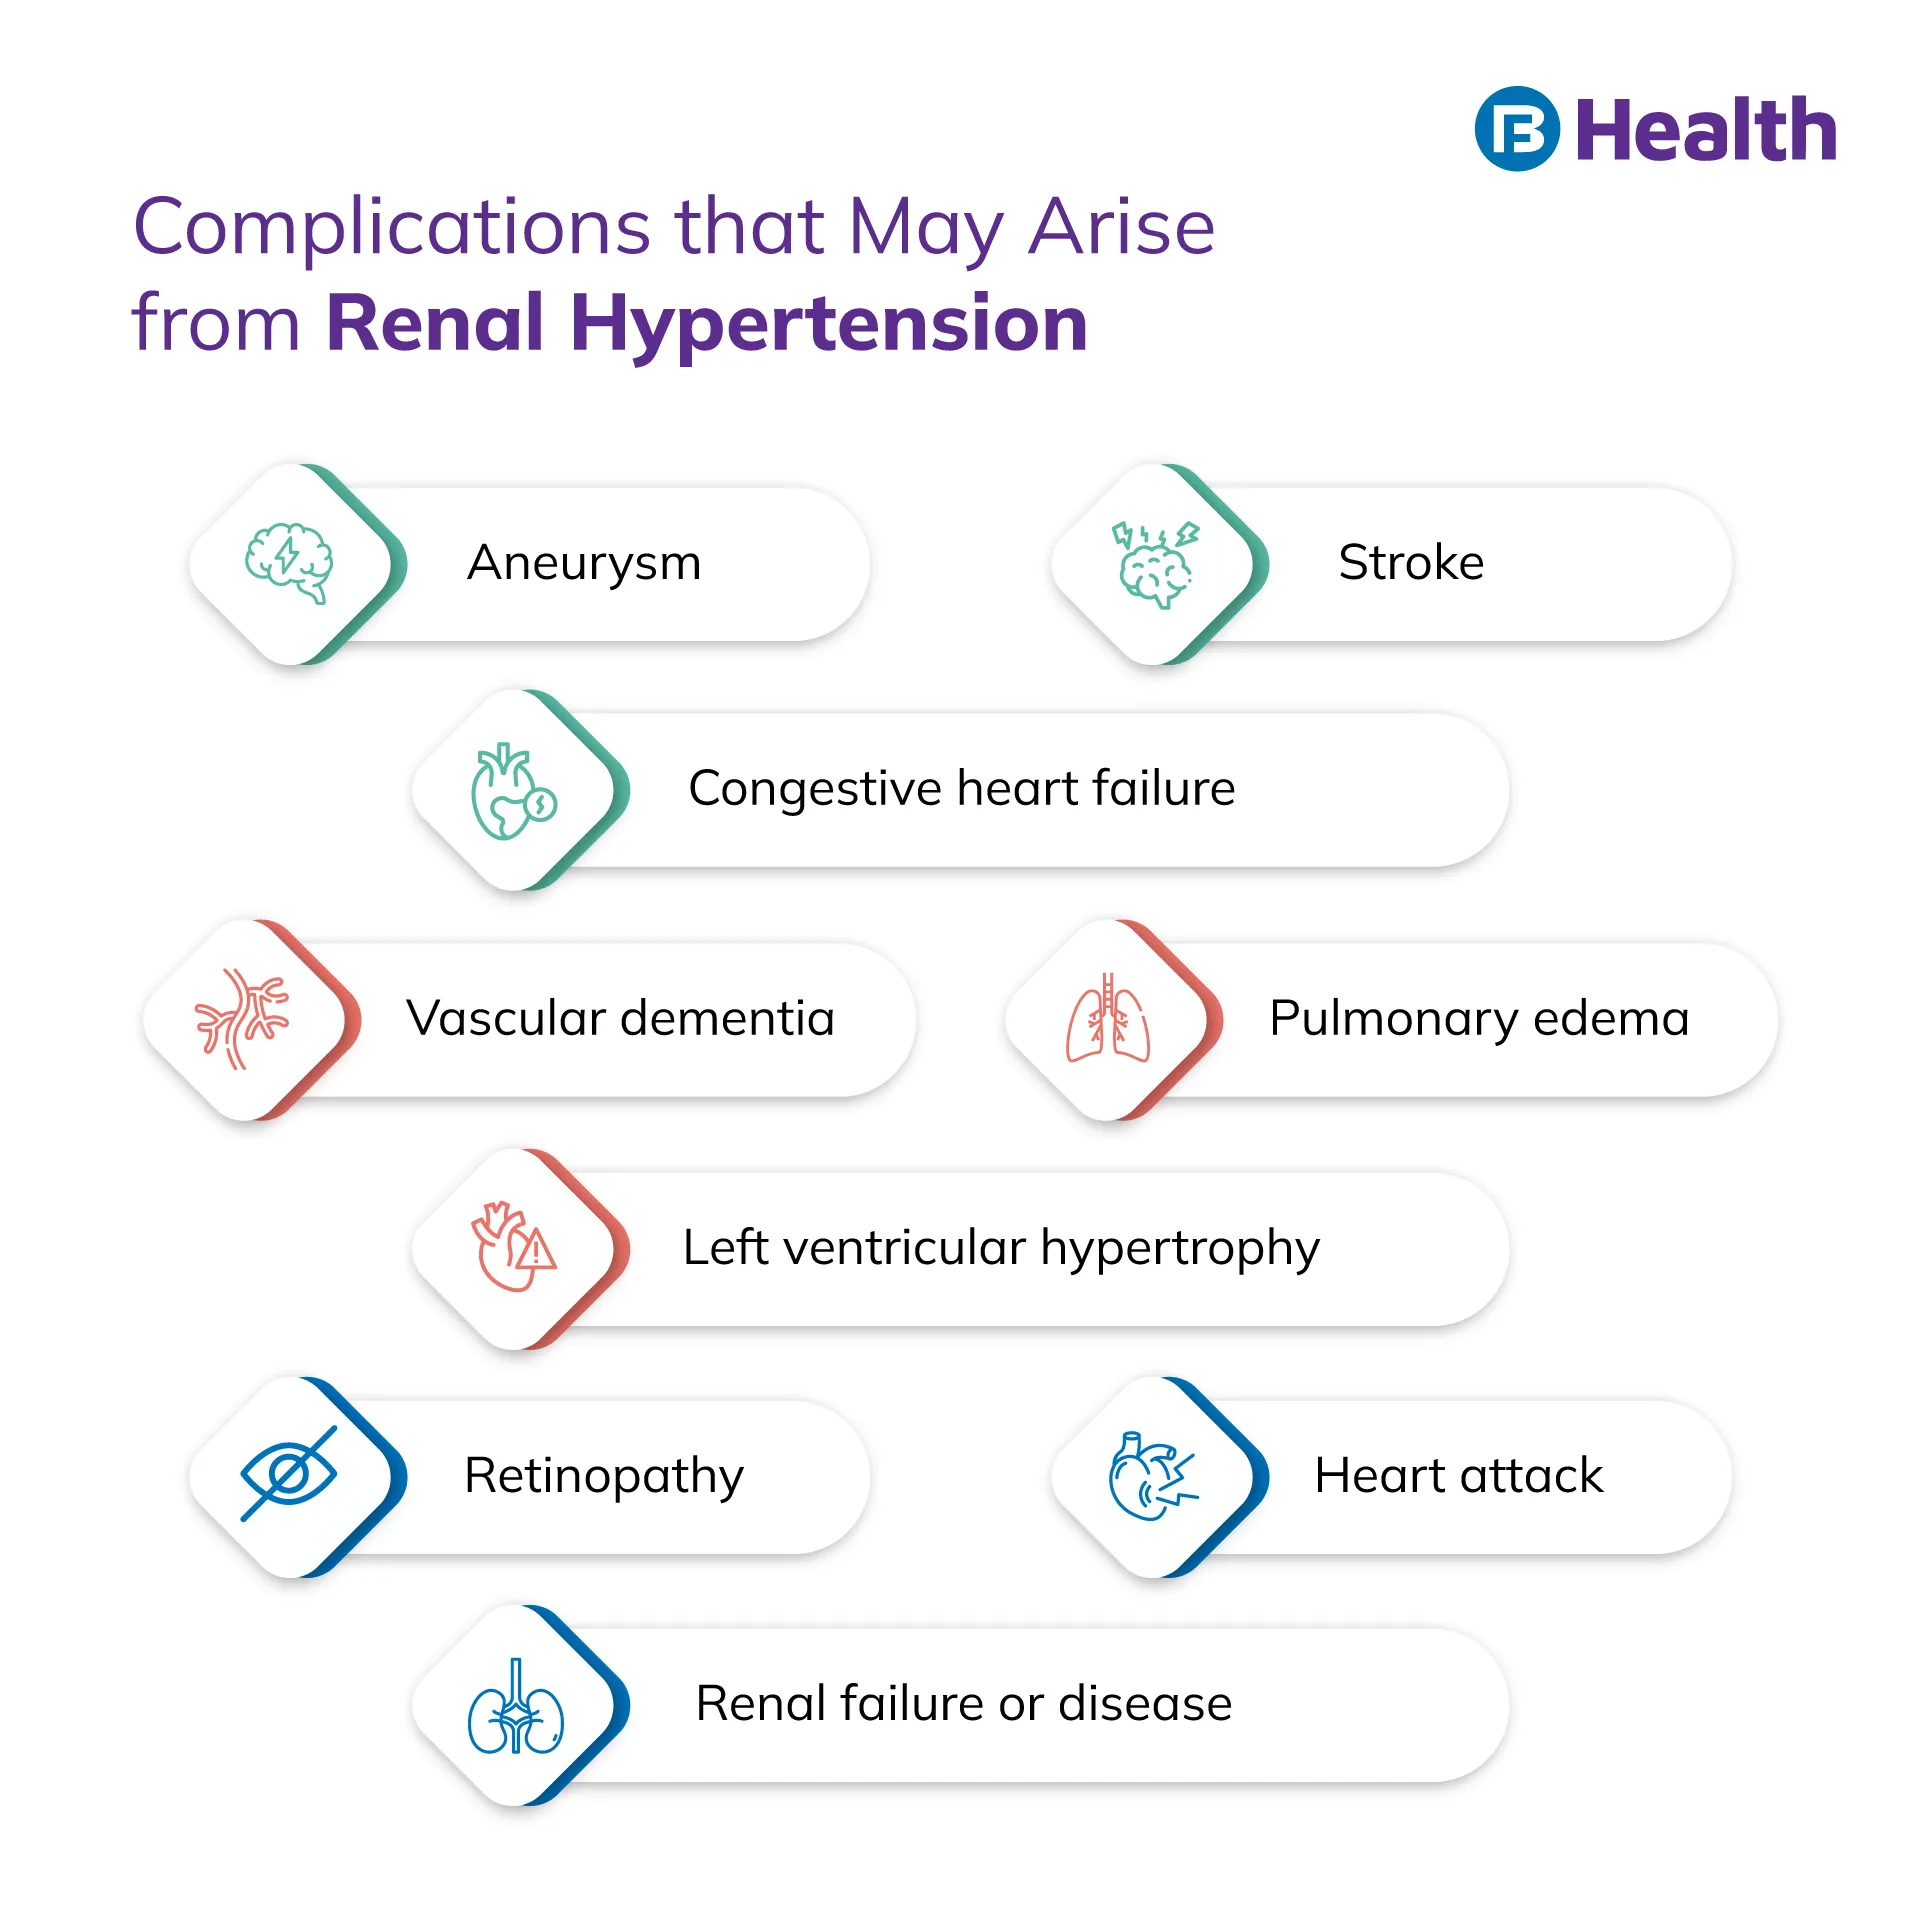 Renal Hypertension complications